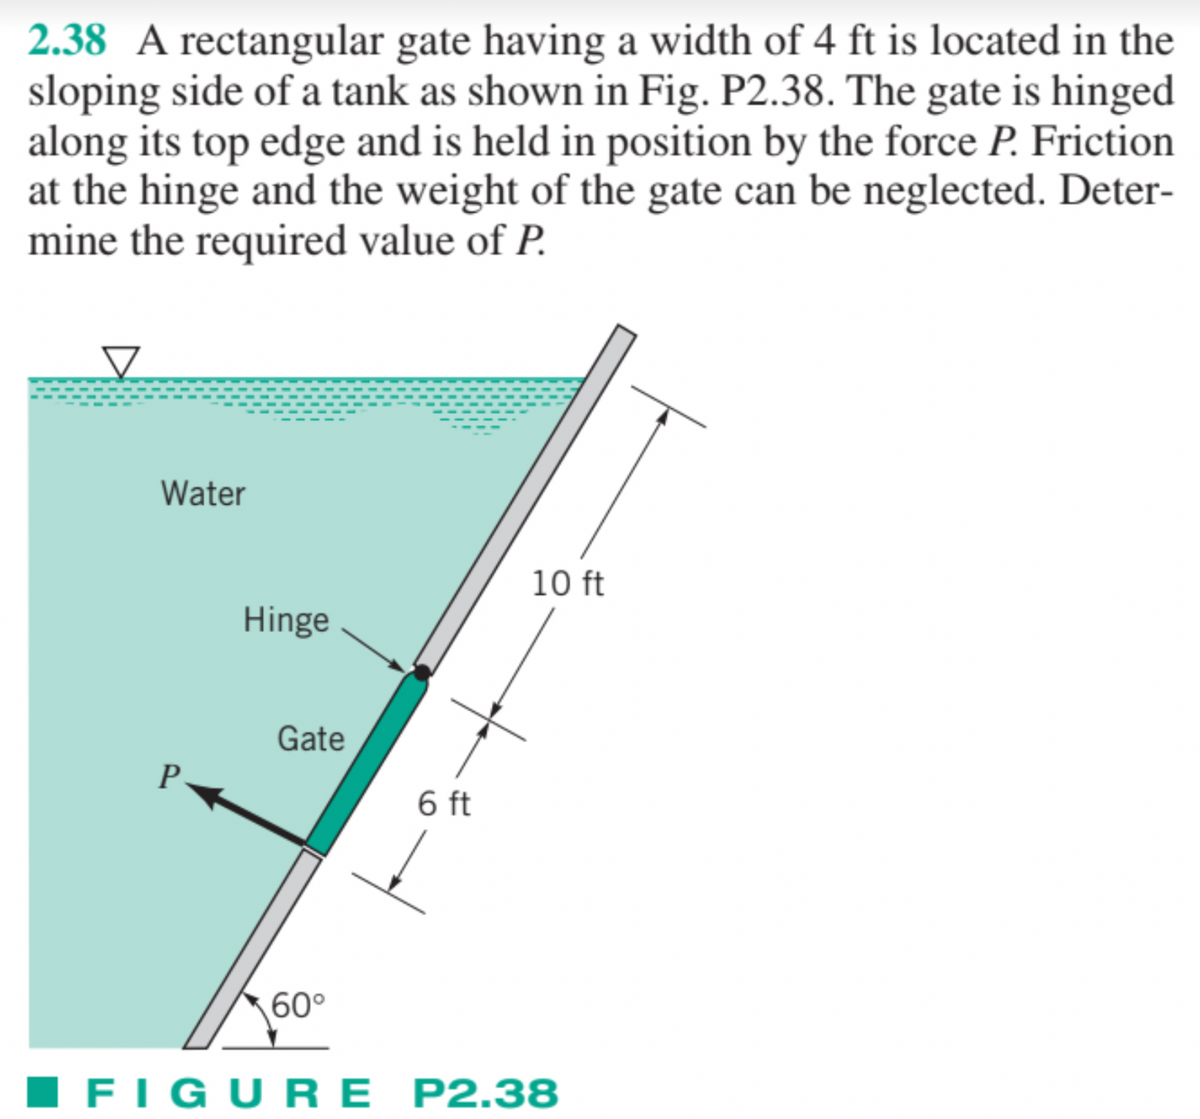 2.38 A rectangular gate having a width of 4 ft is located in the
sloping side of a tank as shown in Fig. P2.38. The gate is hinged
along its top edge and is held in position by the force P. Friction
at the hinge and the weight of the gate can be neglected. Deter-
mine the required value of P.
Water
P
Hinge
Gate
60°
6 ft
10 ft
FIGURE P2.38